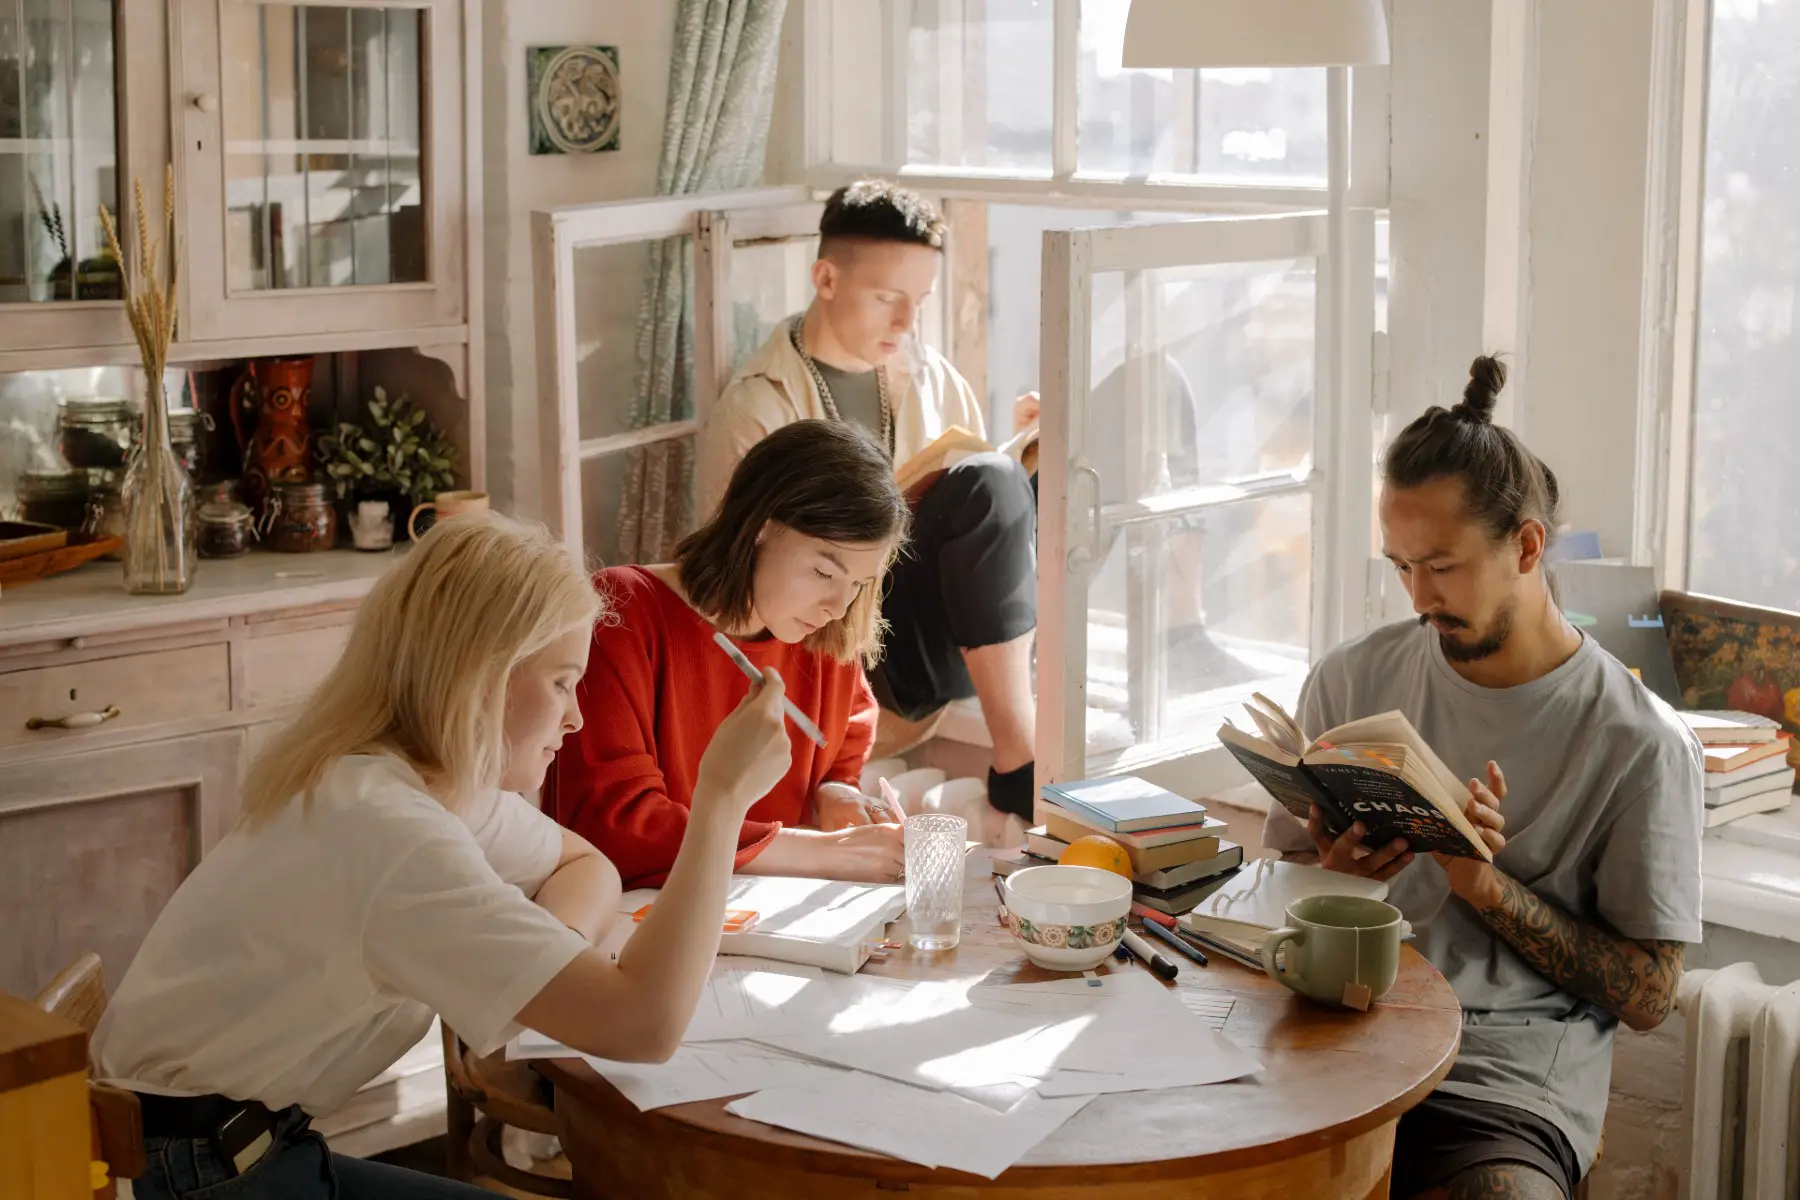 A group of students, (two women and one man) studying at a round table. One man is sitting in the window sill reading a book.